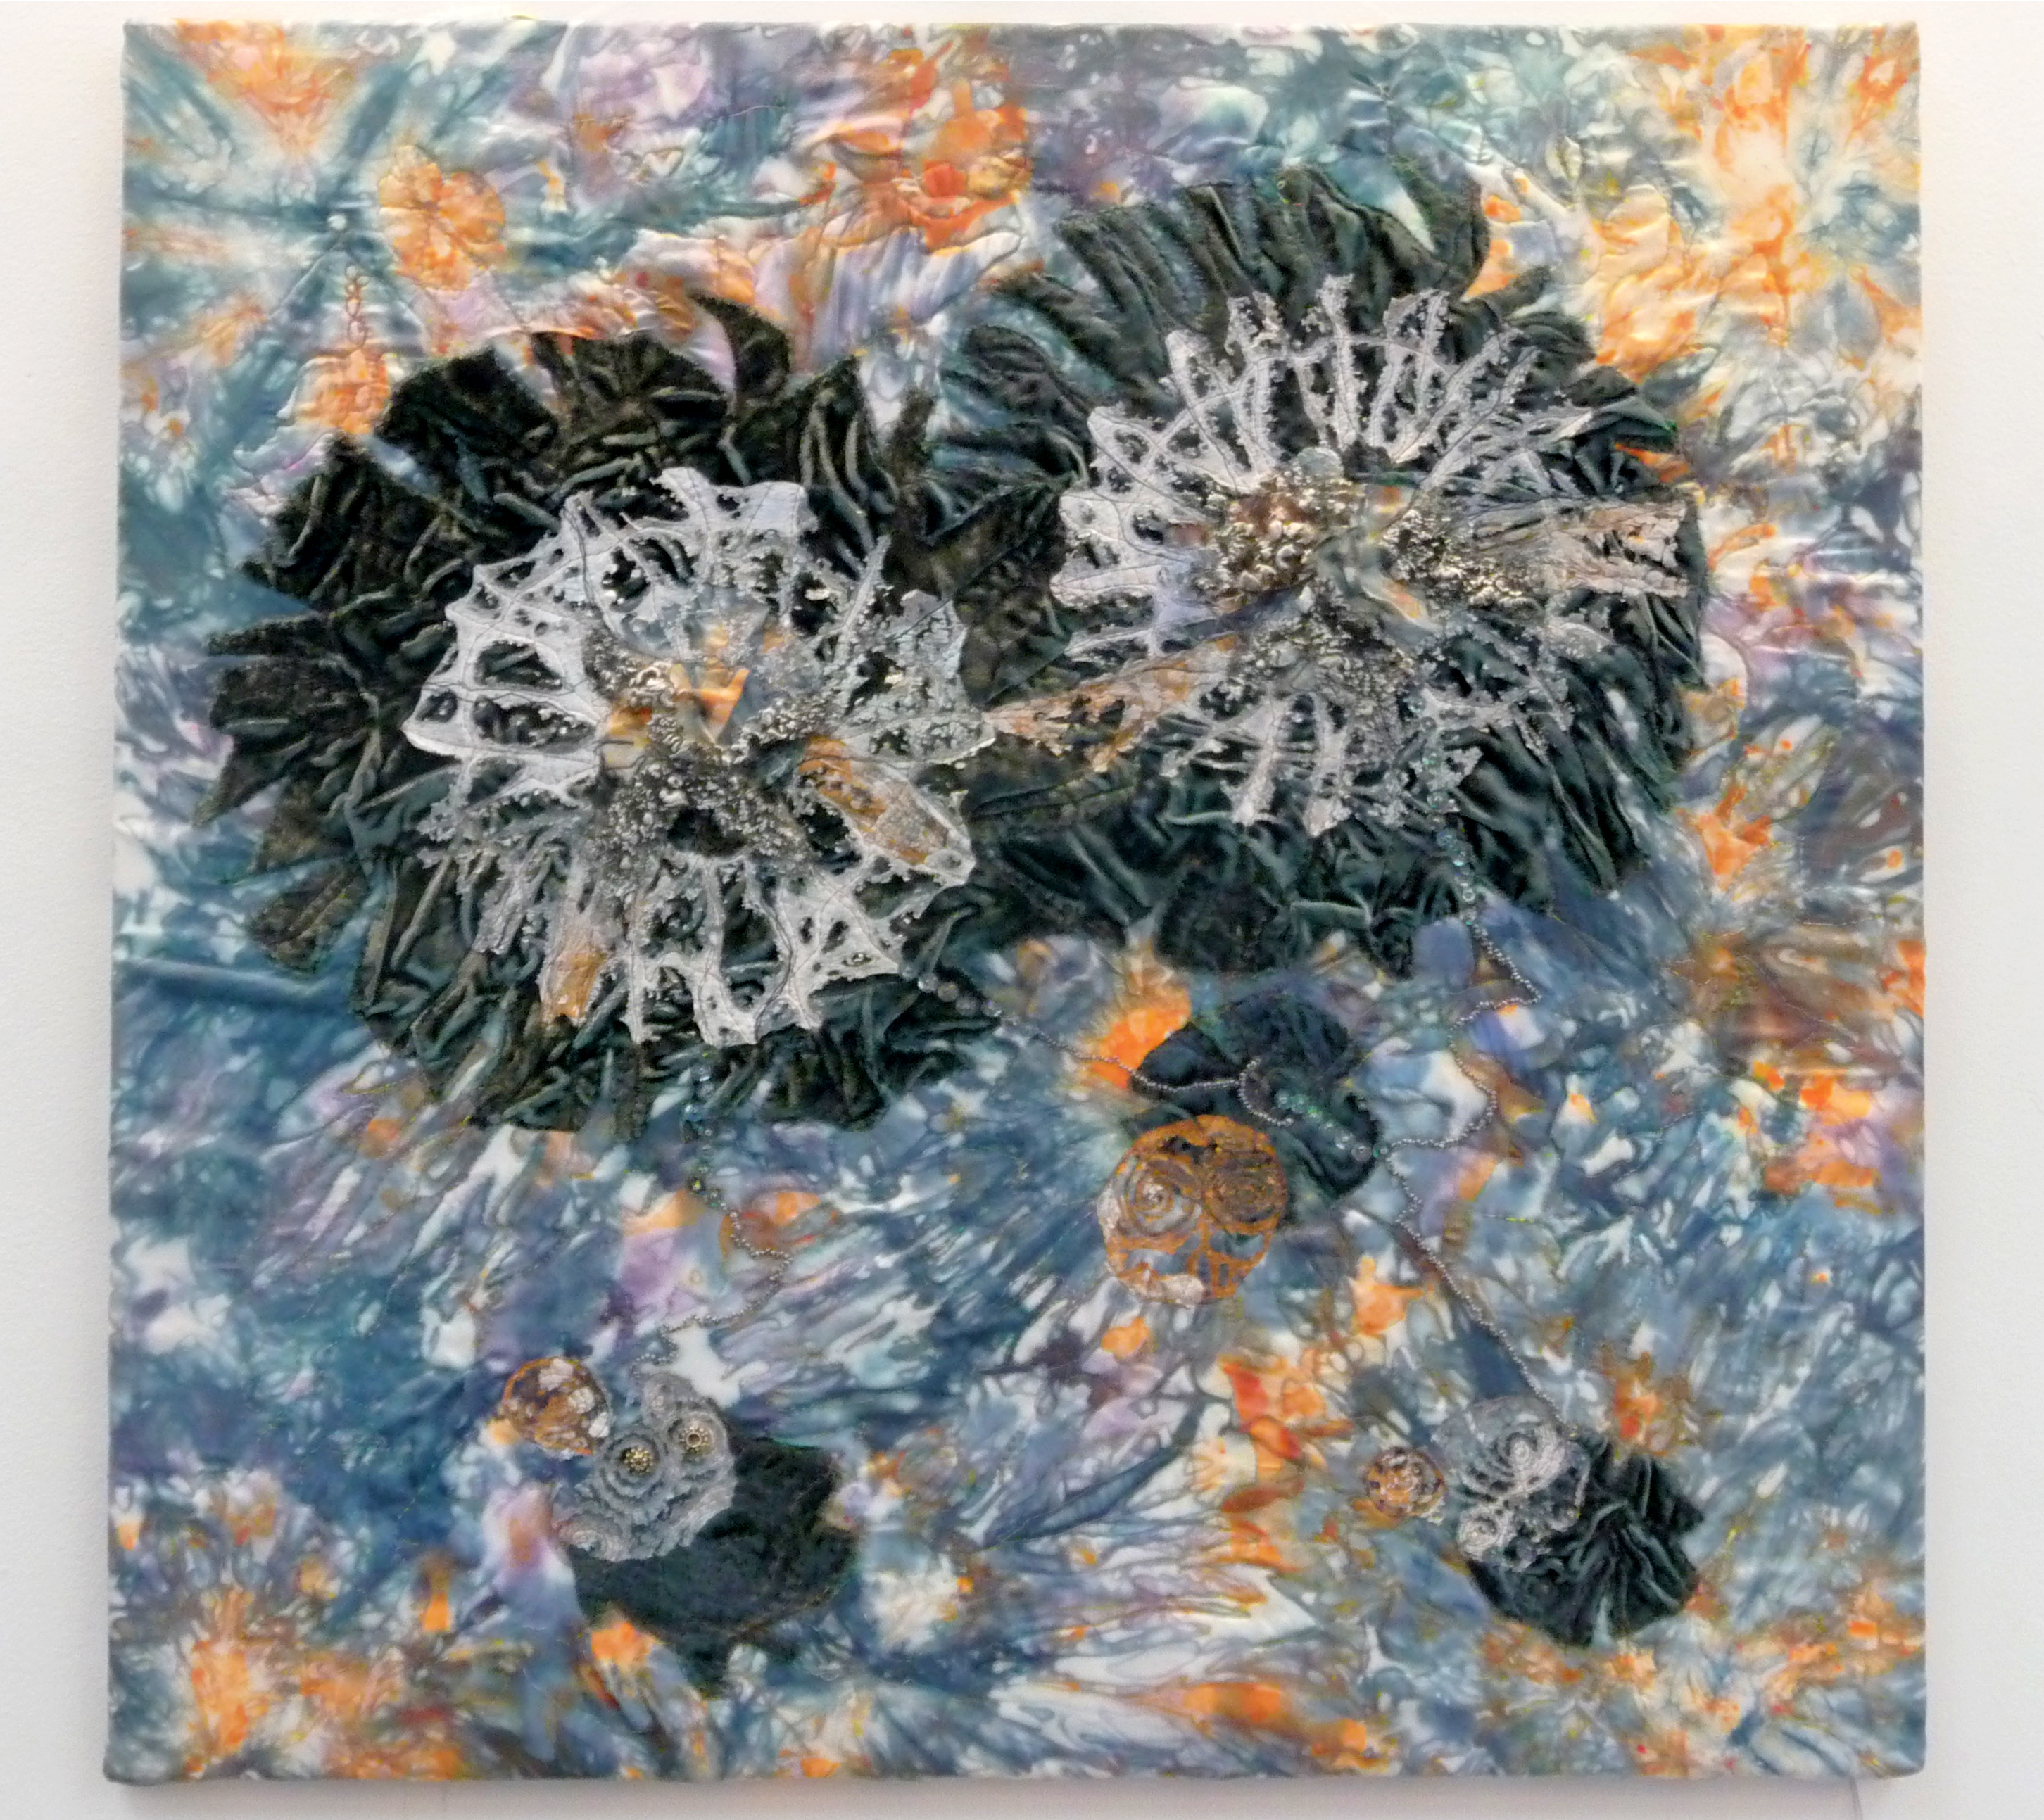 MOLTEN STREAMS OF SILVER by Sue Chisnell-Sumner, tray dyed silk and mixed media